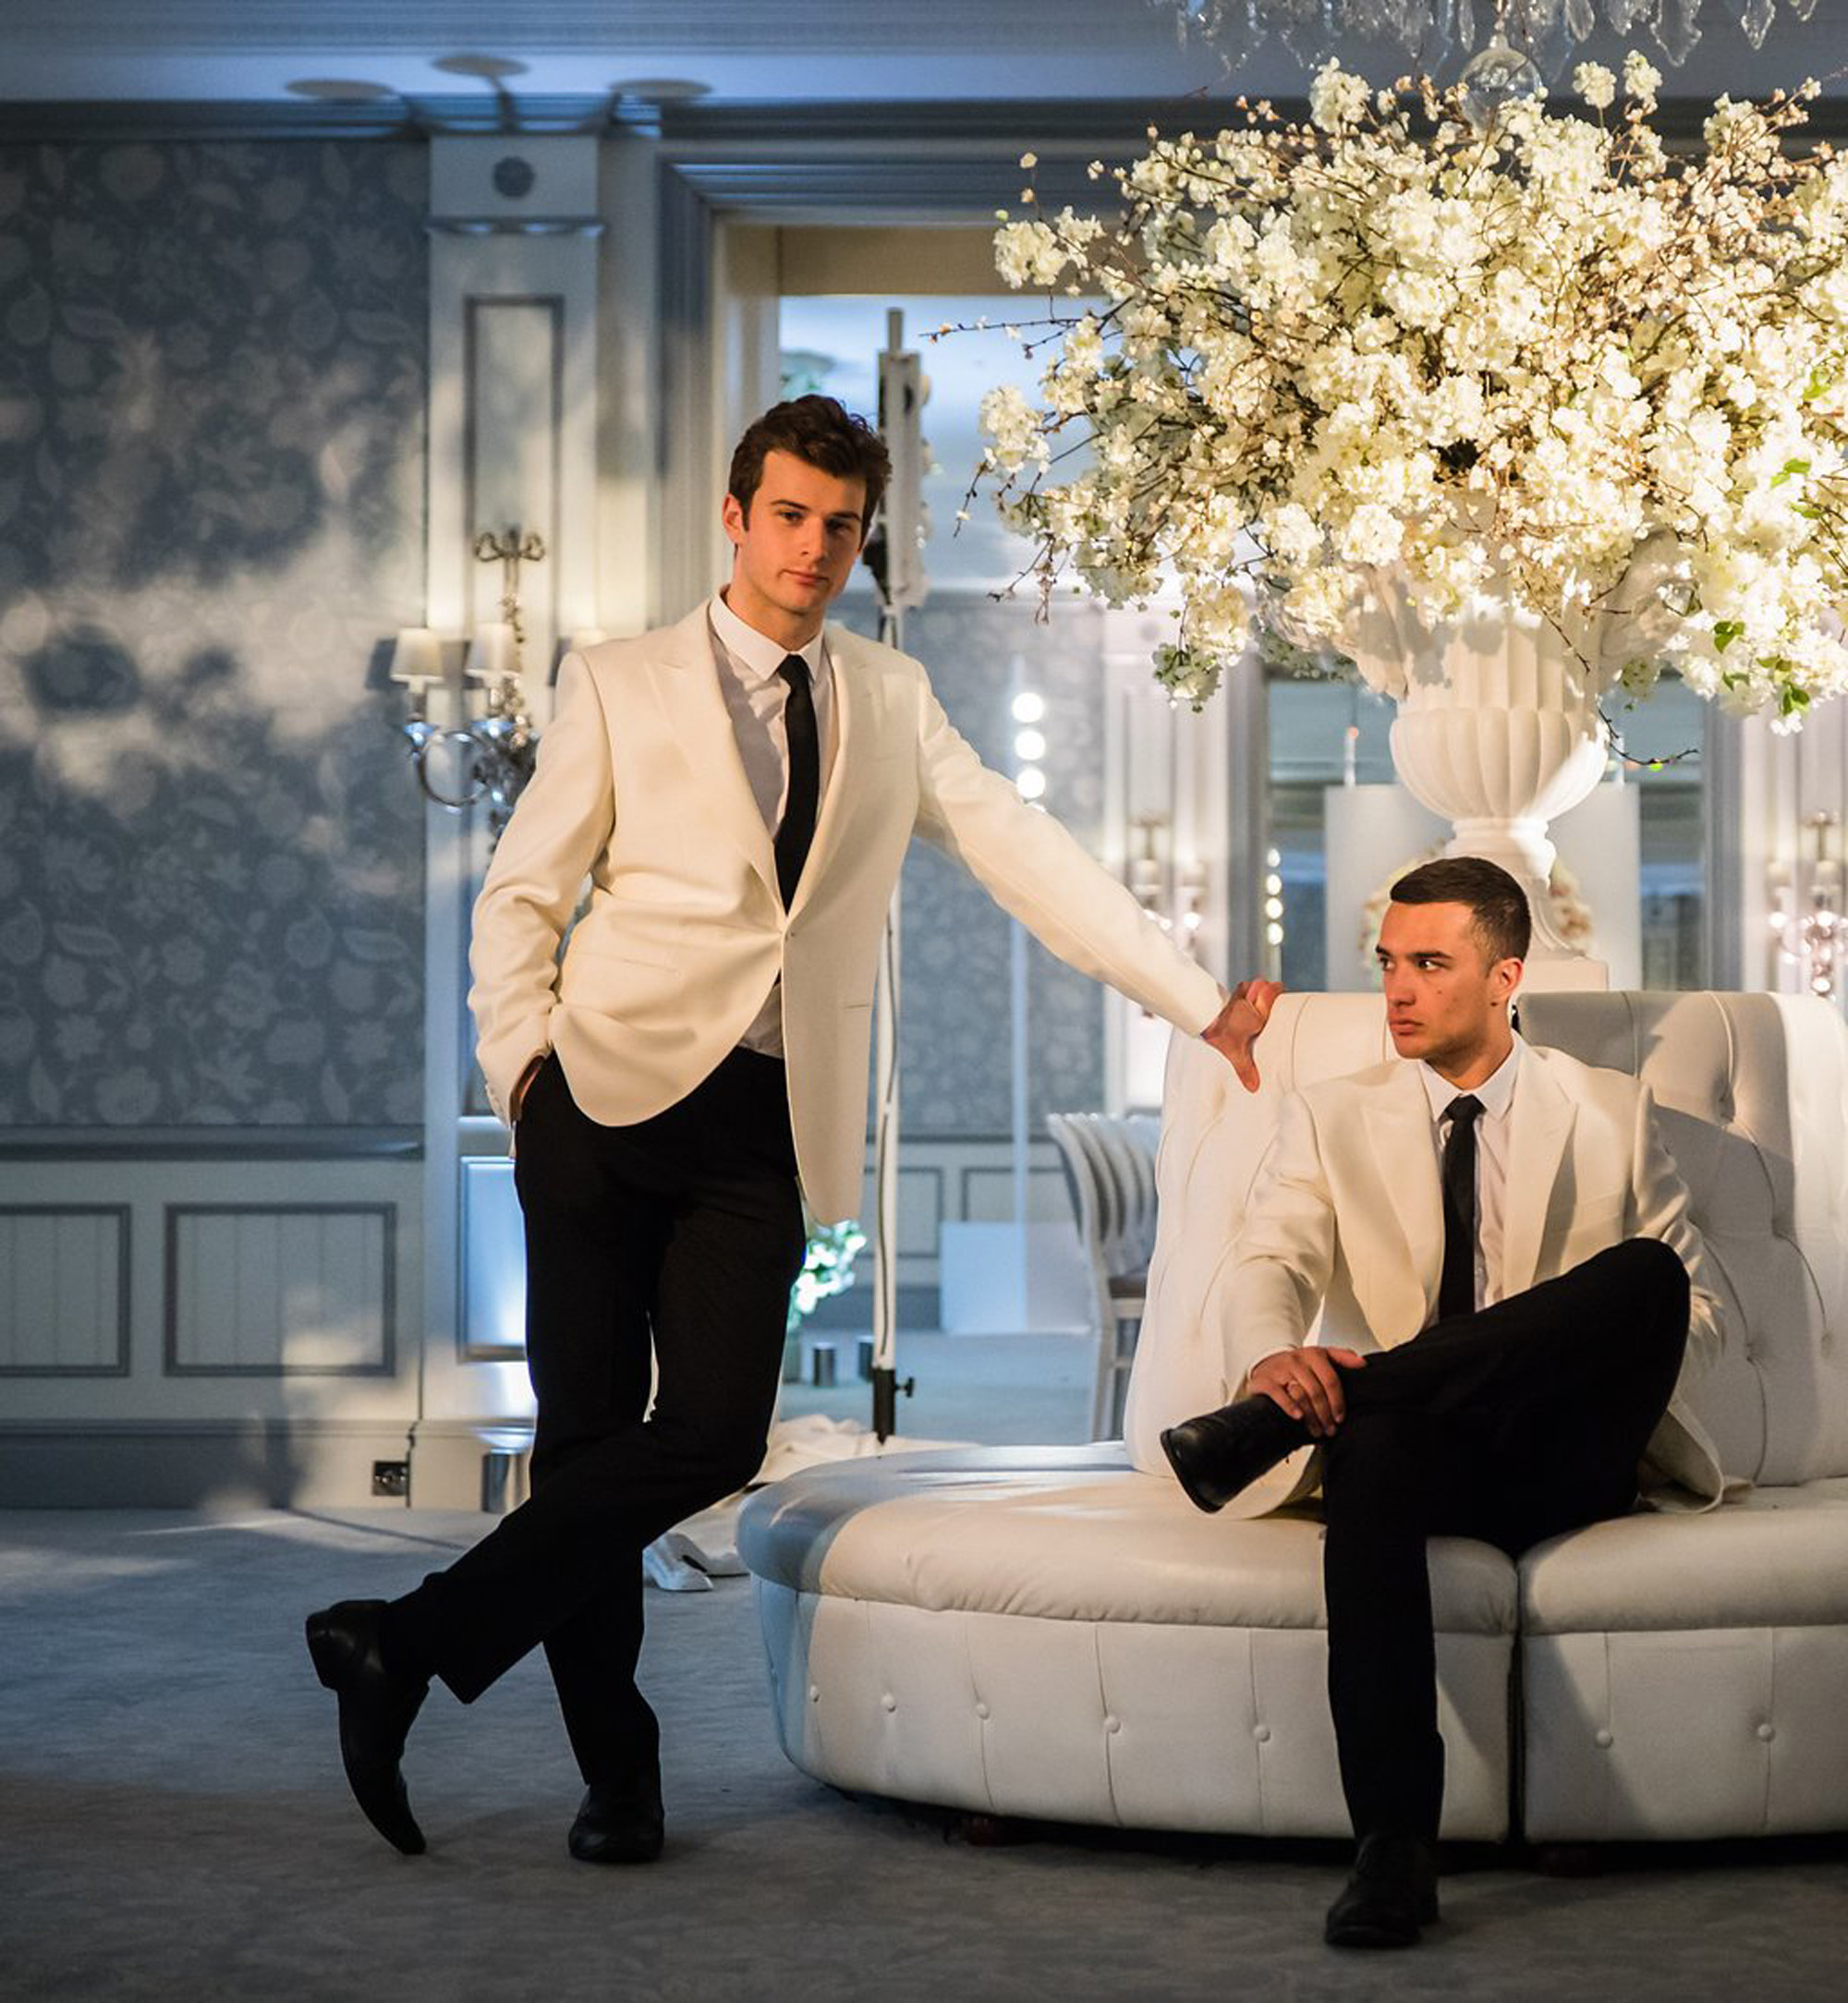 Niemierko hosts dressed in white suit jackets and black trousers pose for a photograph in a luxury hotel, seated on white leather below a luxurious pure white floral arrangement